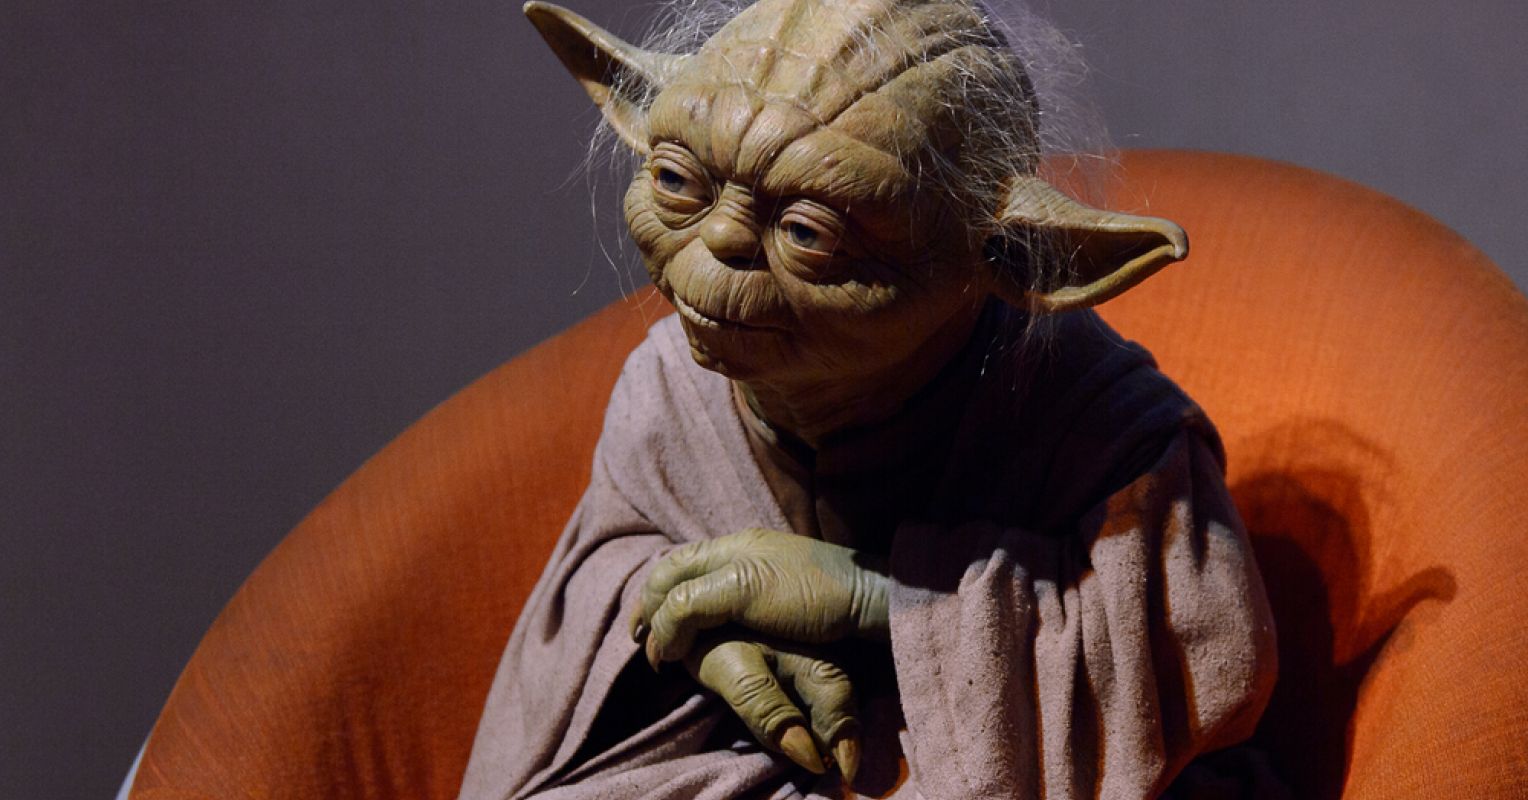 Why Baby Yoda Is So Adorable, According to Science